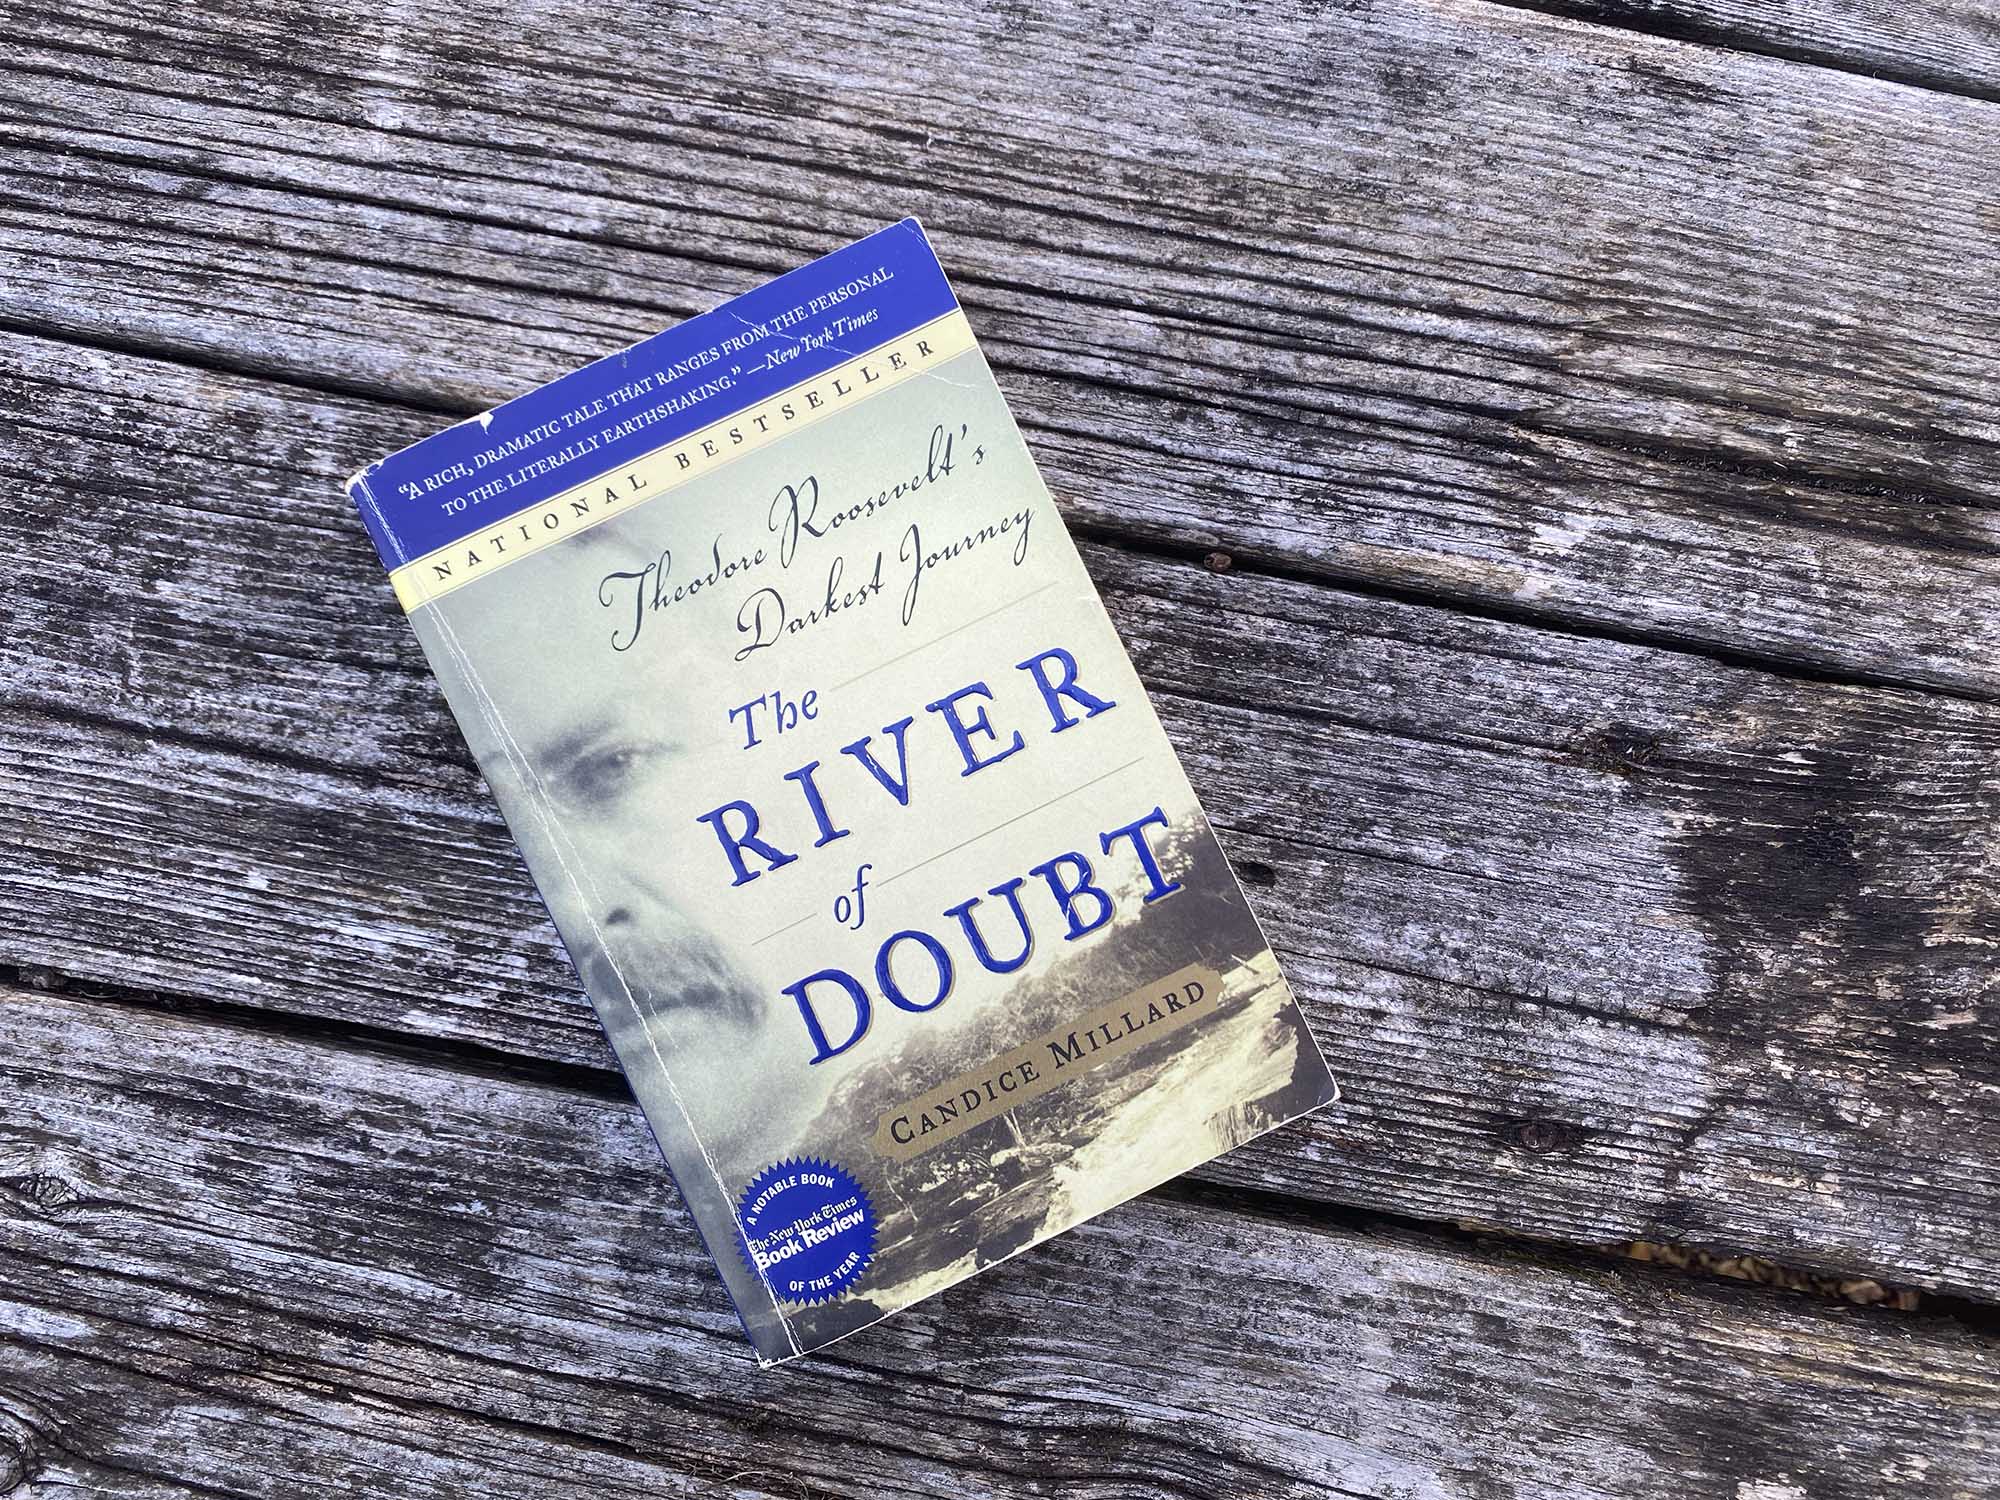 The River of Doubt book cover.